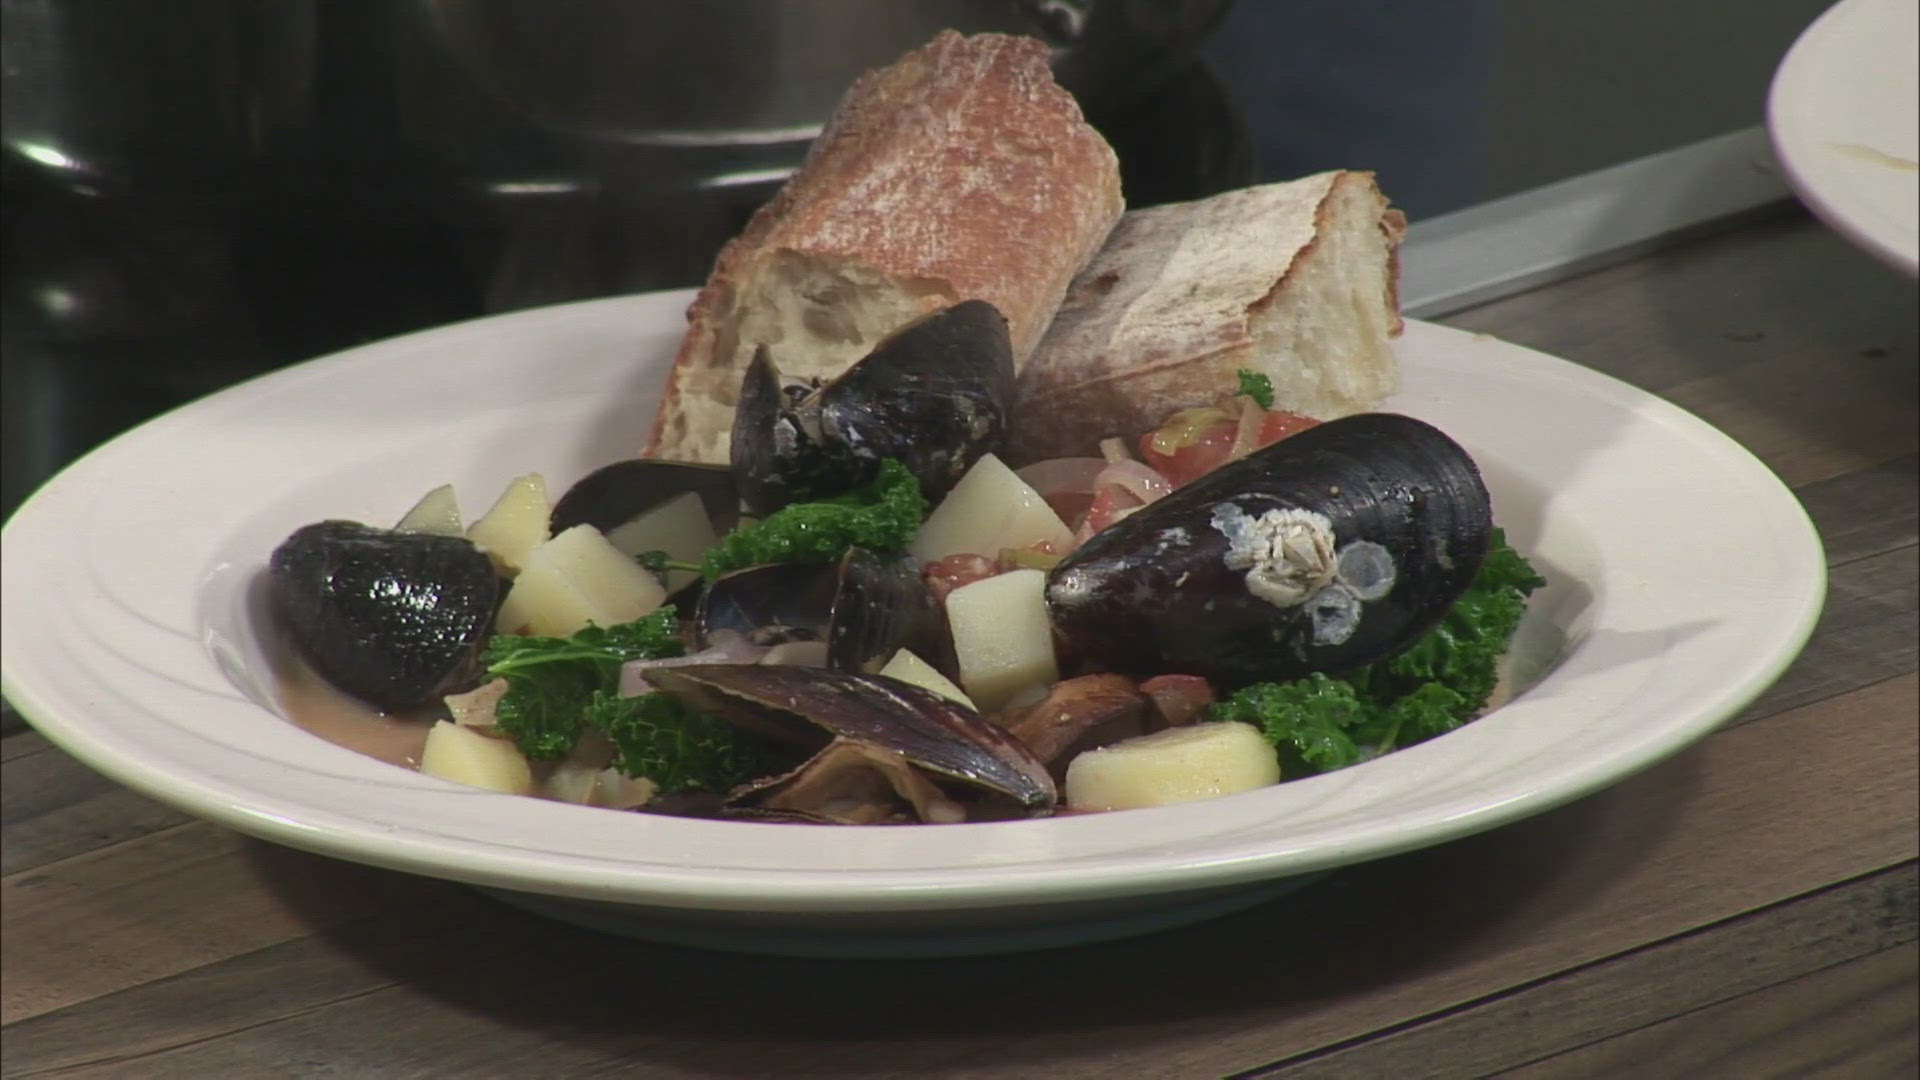 Chef David Turin shares his recipe for haddock and mussels.